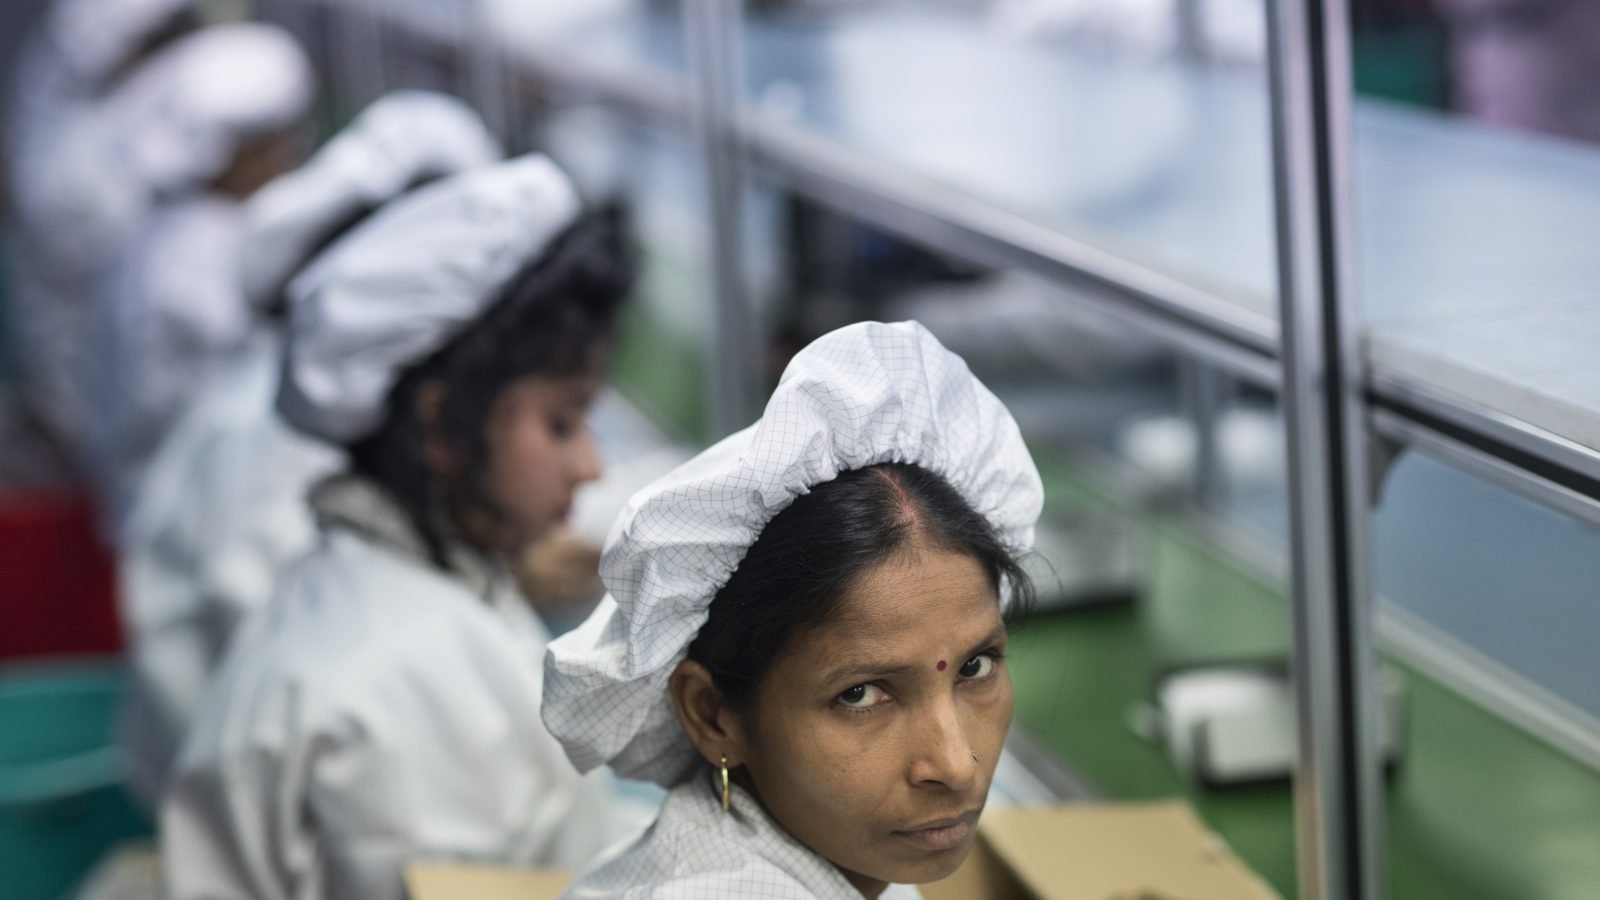 Apple and Foxconn lobbied India to relax its labor laws. Unions are fighting back